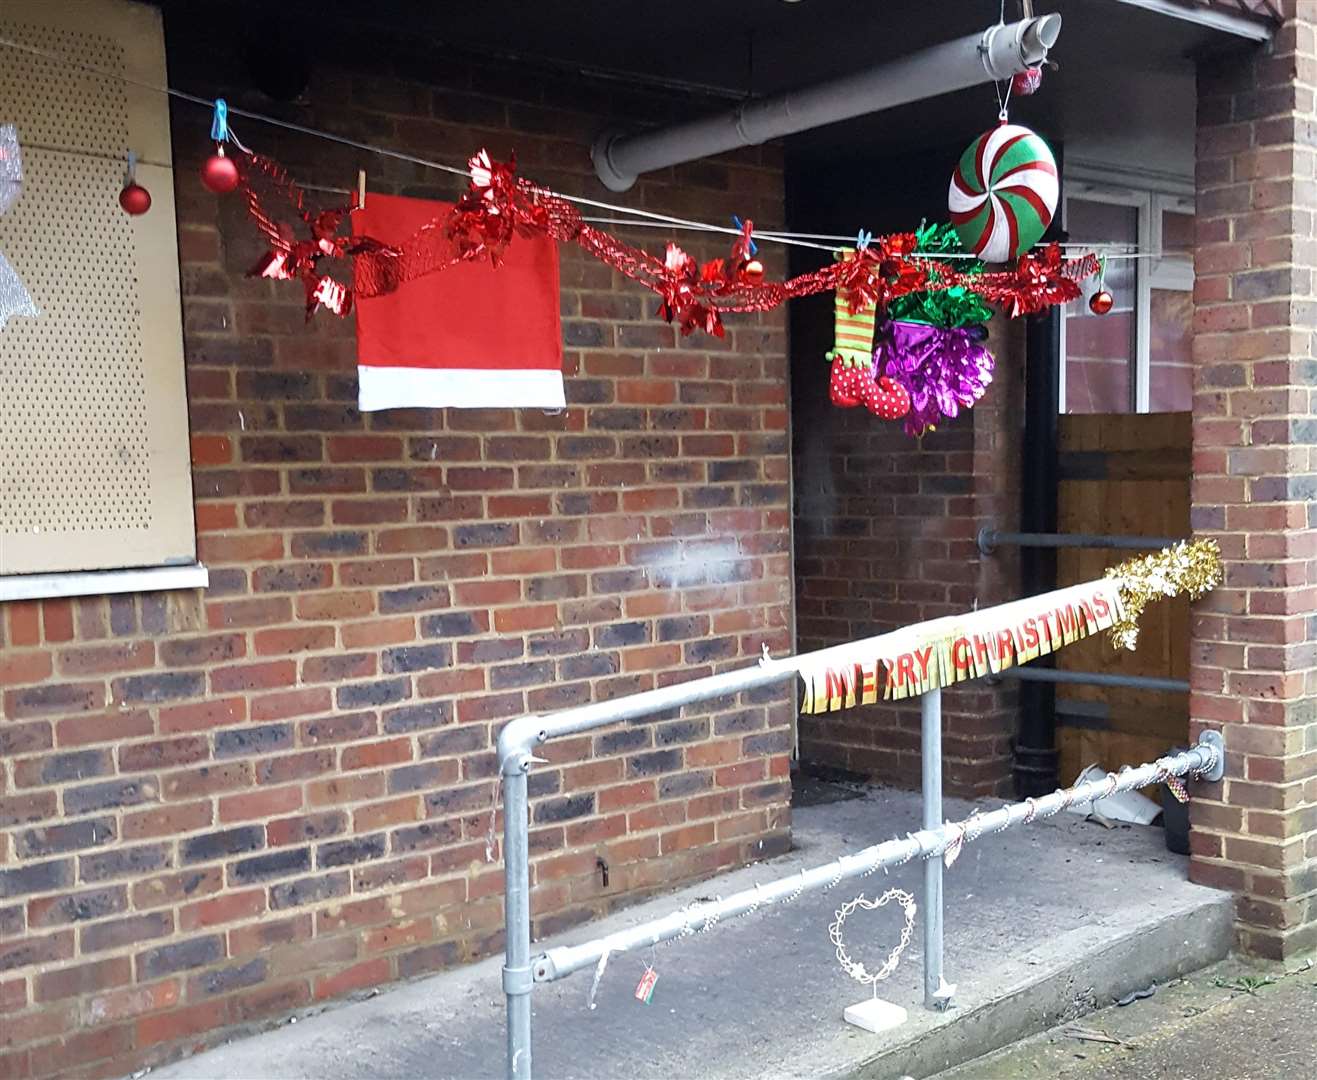 Judith Tucker's porch has been decorated by members of the community